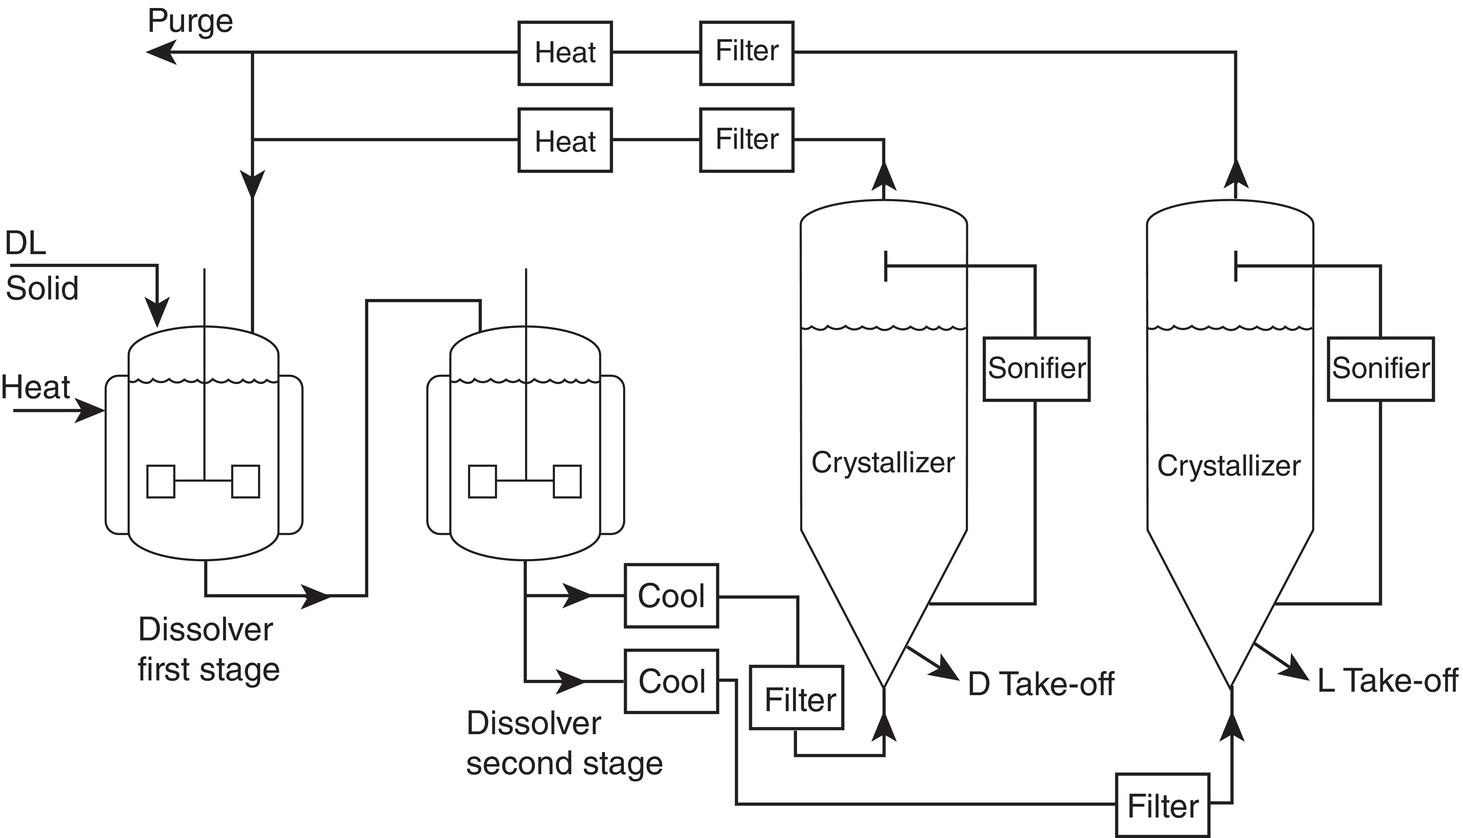 Schematic illustration of flow pattern for fluidized bed separation of stereoisomers.